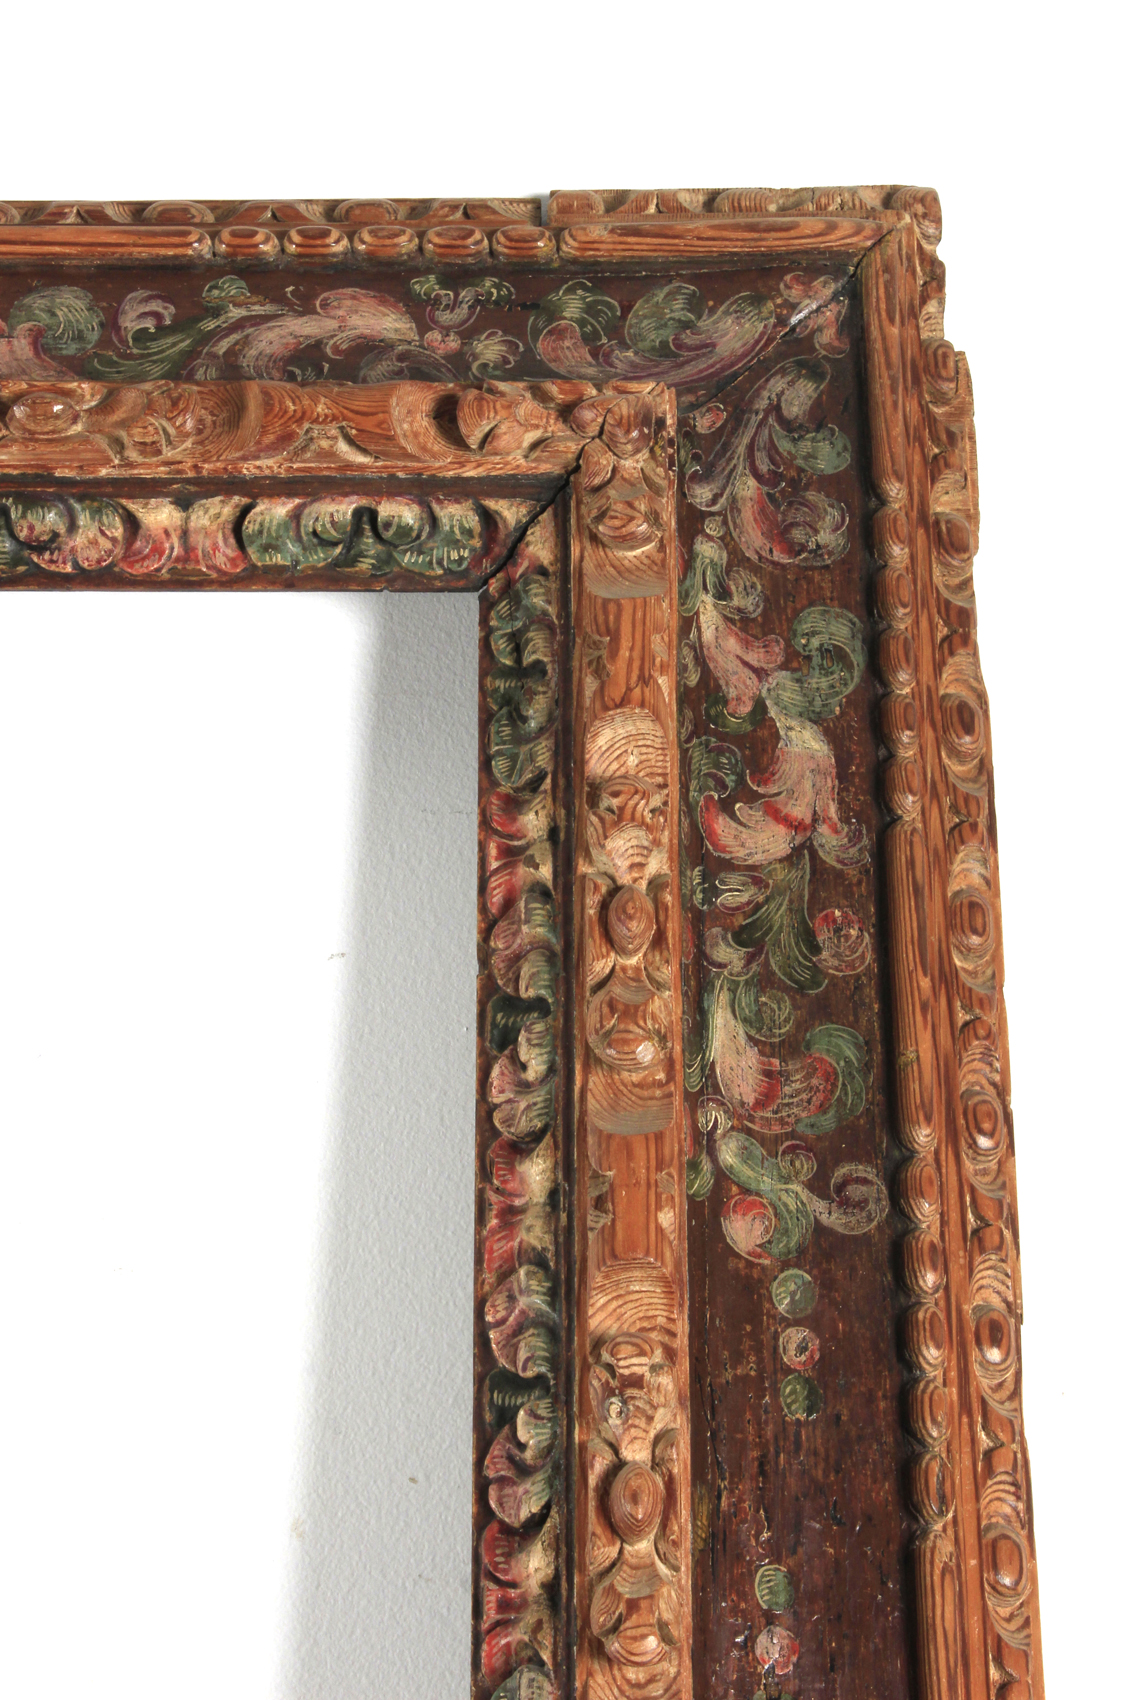 An early 17th century Spanish frame in carved and polychromed wood - Image 2 of 3